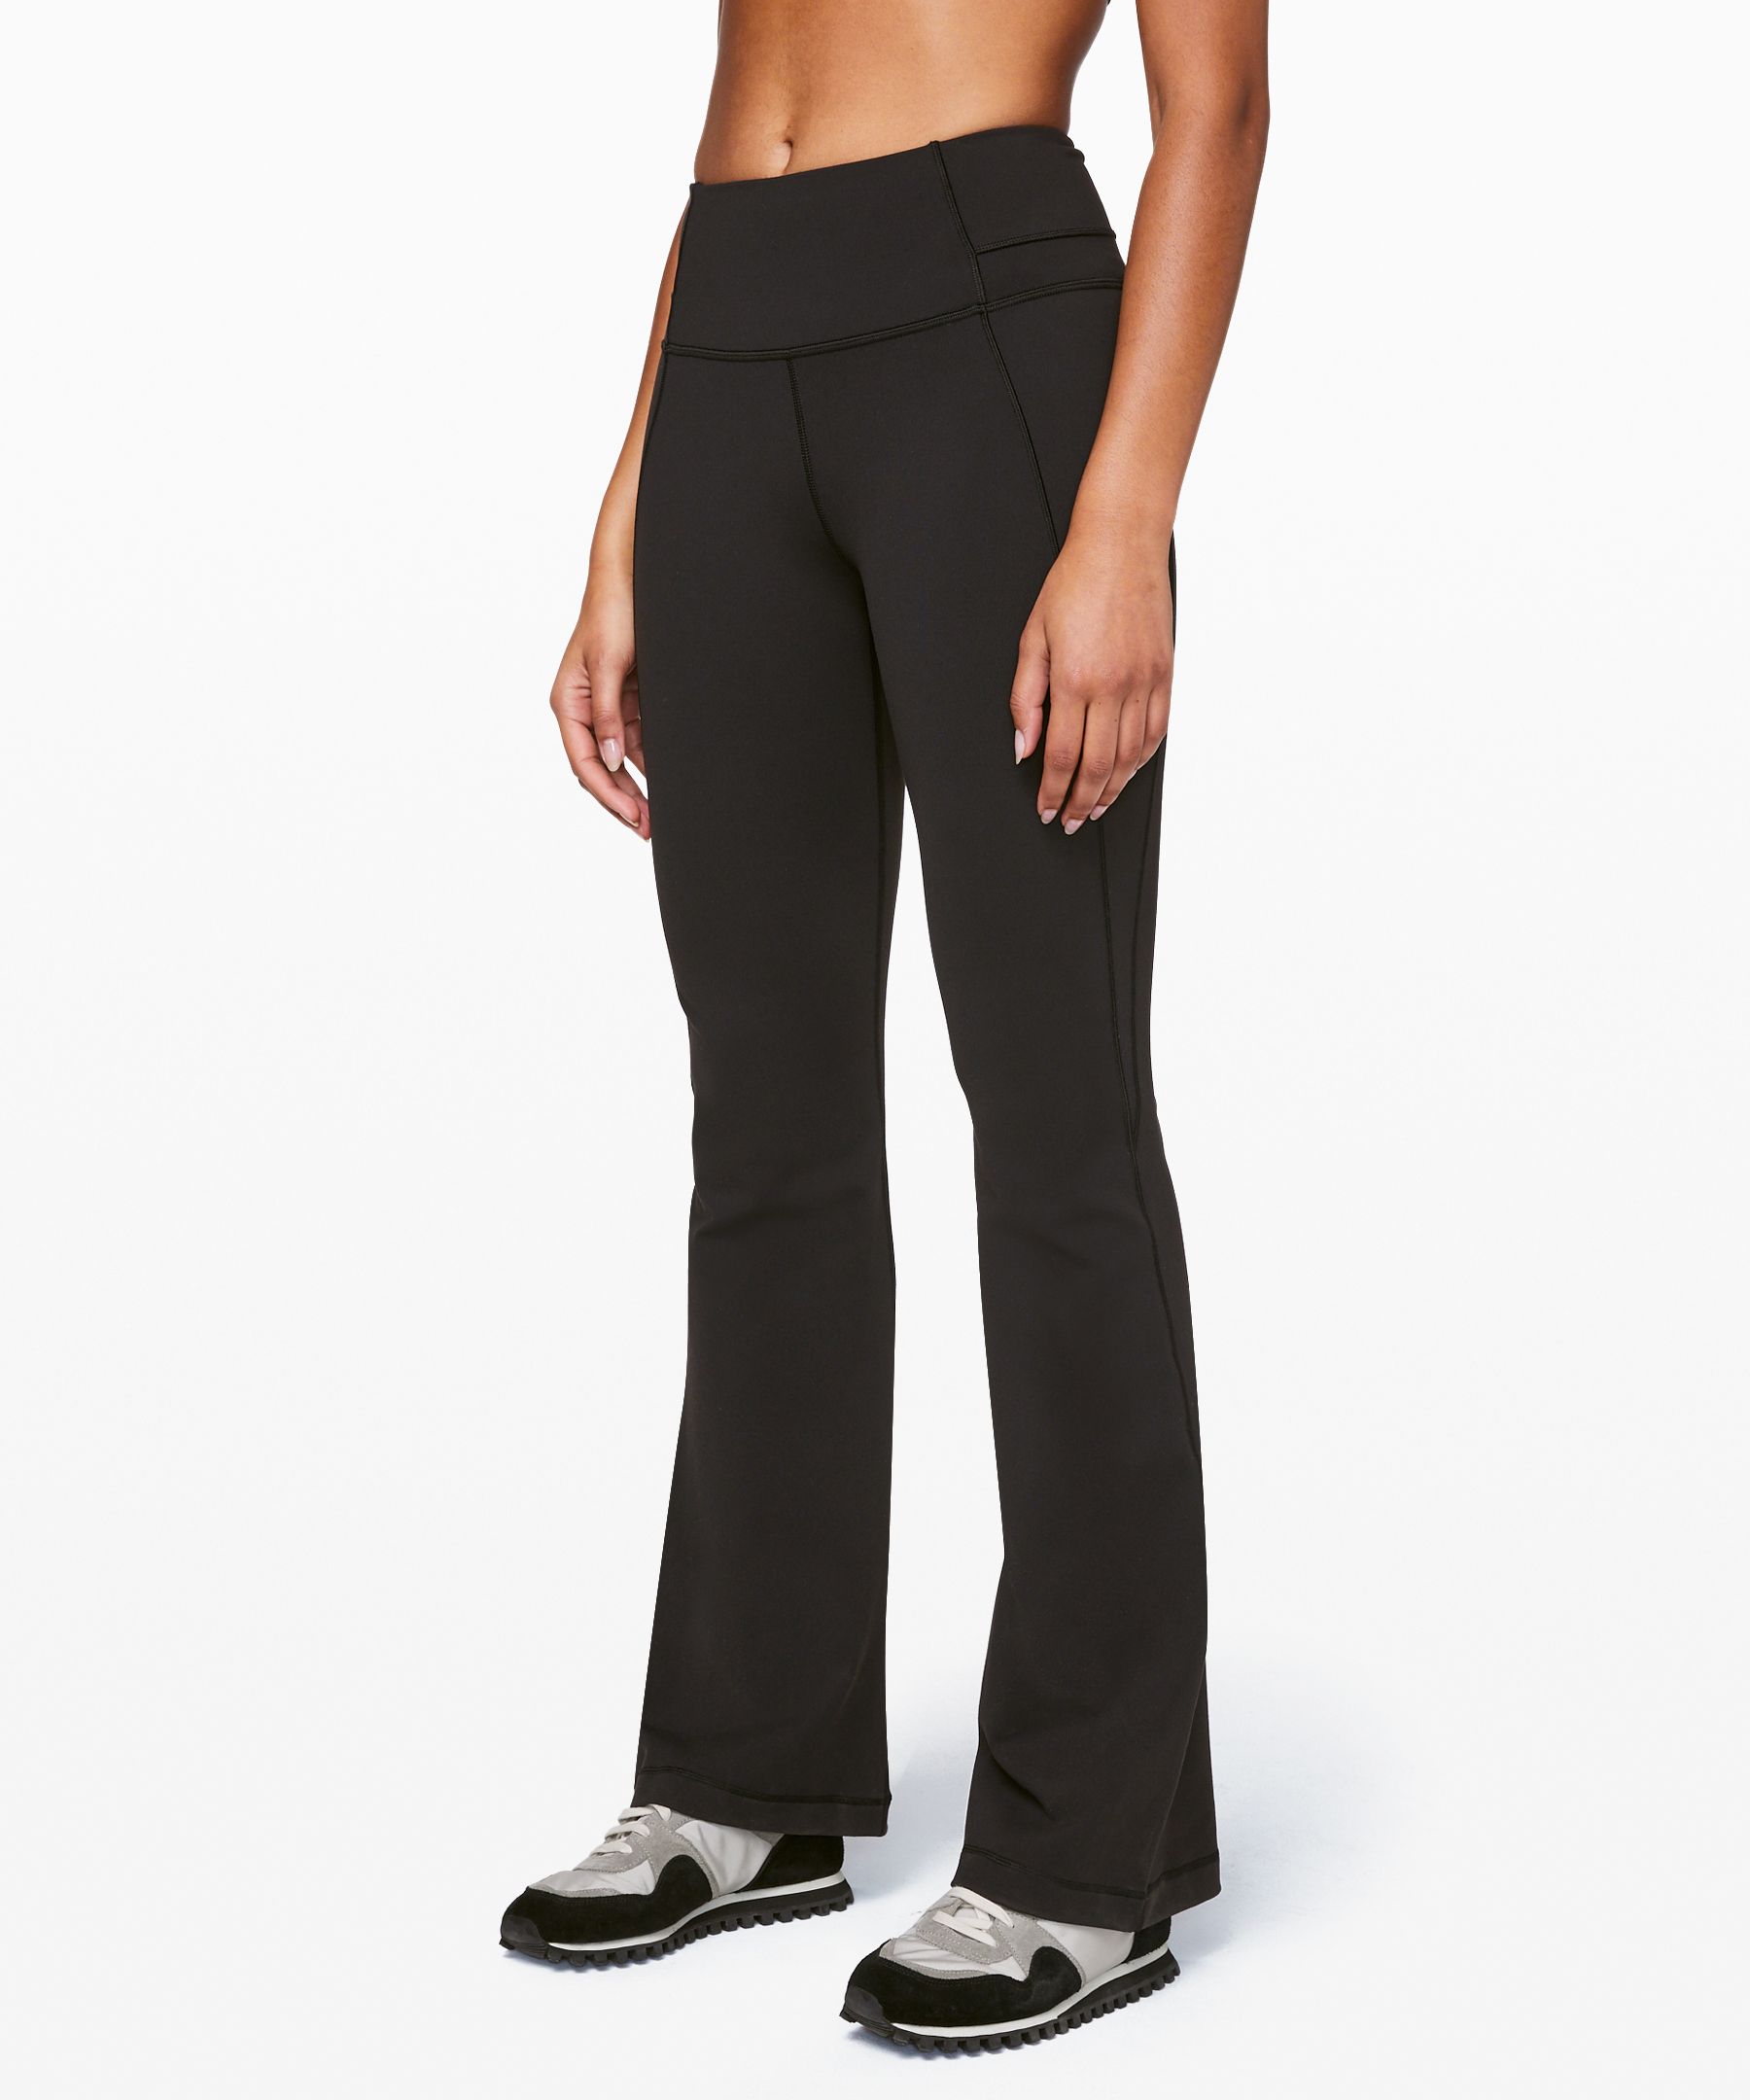 groove pant flare 32